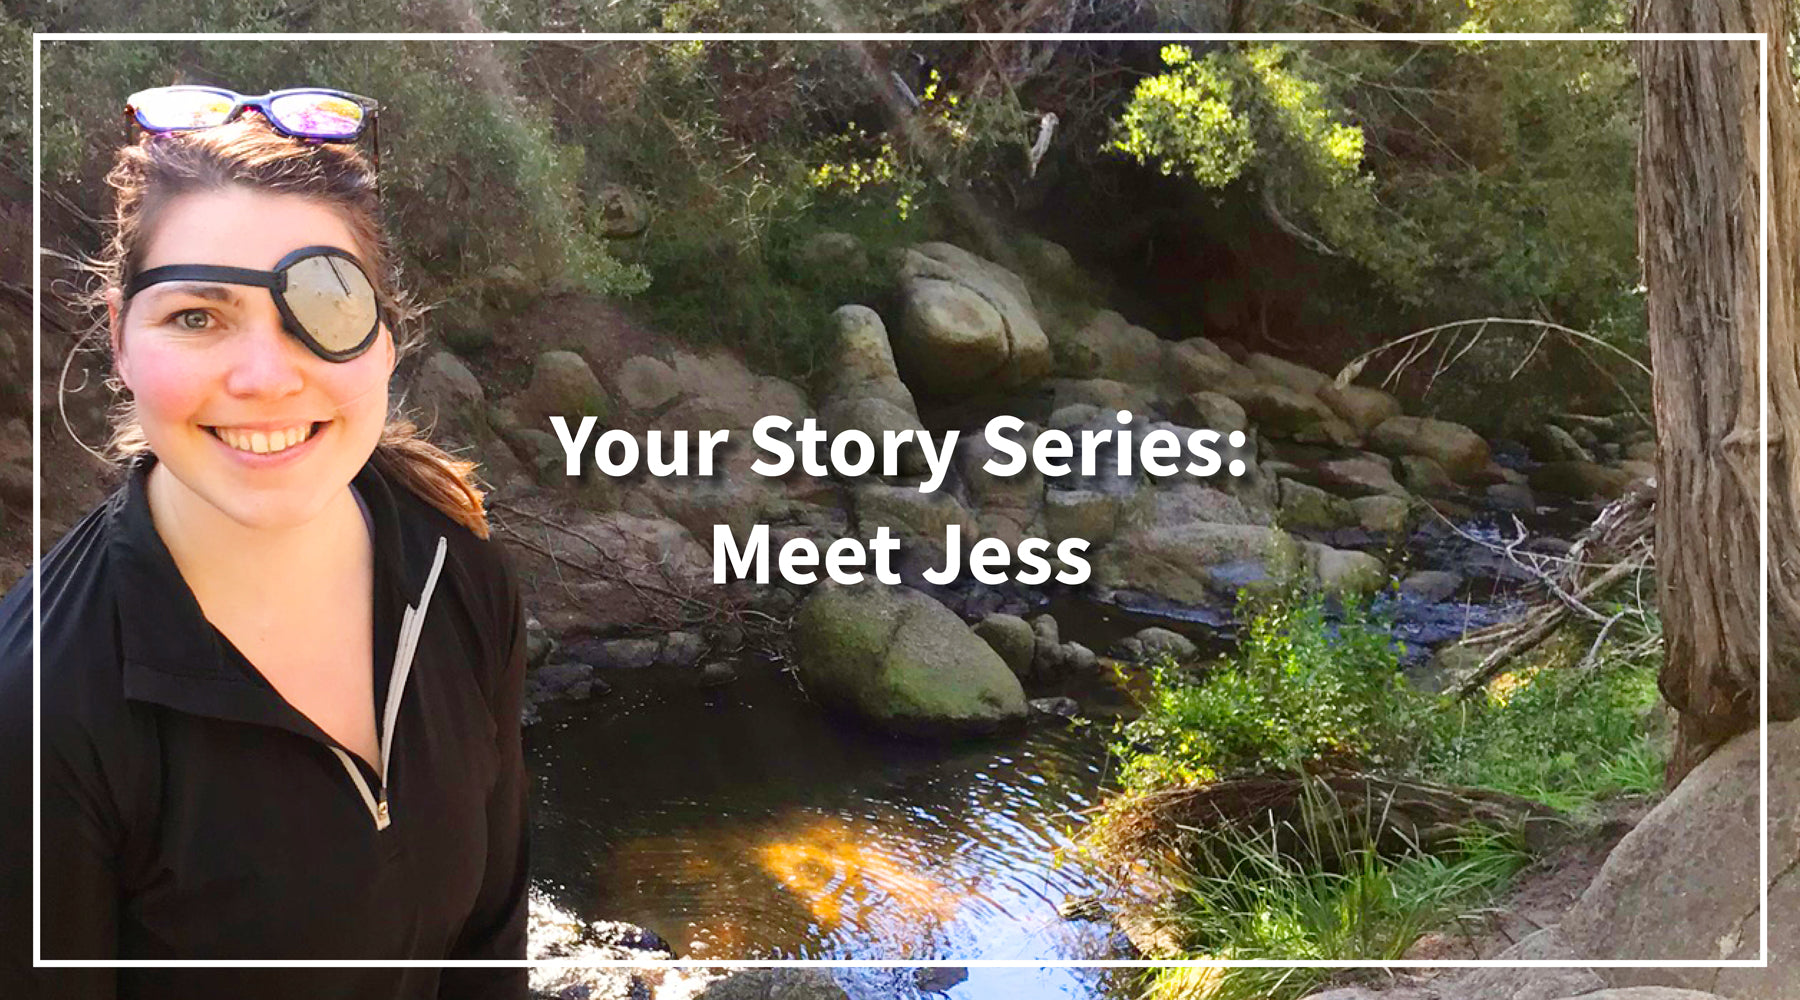 Your Story Series: Meet Jess